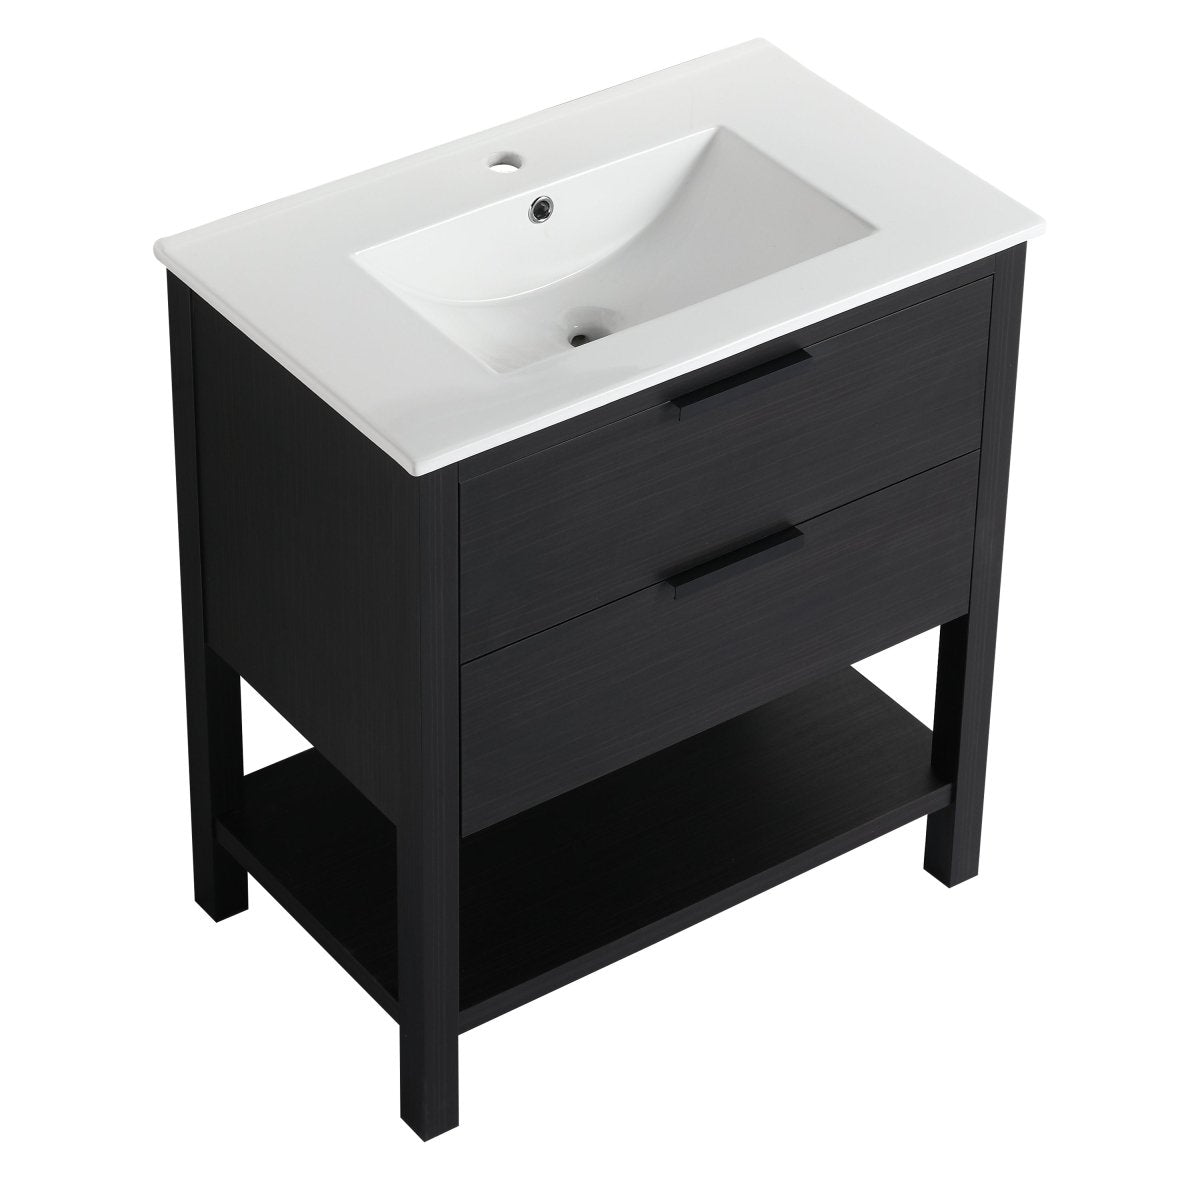 Exbrite 30 inch Bathroom Vanity With Sink and 2 Soft Close Drawers-BVB01030BCT-BL9075B